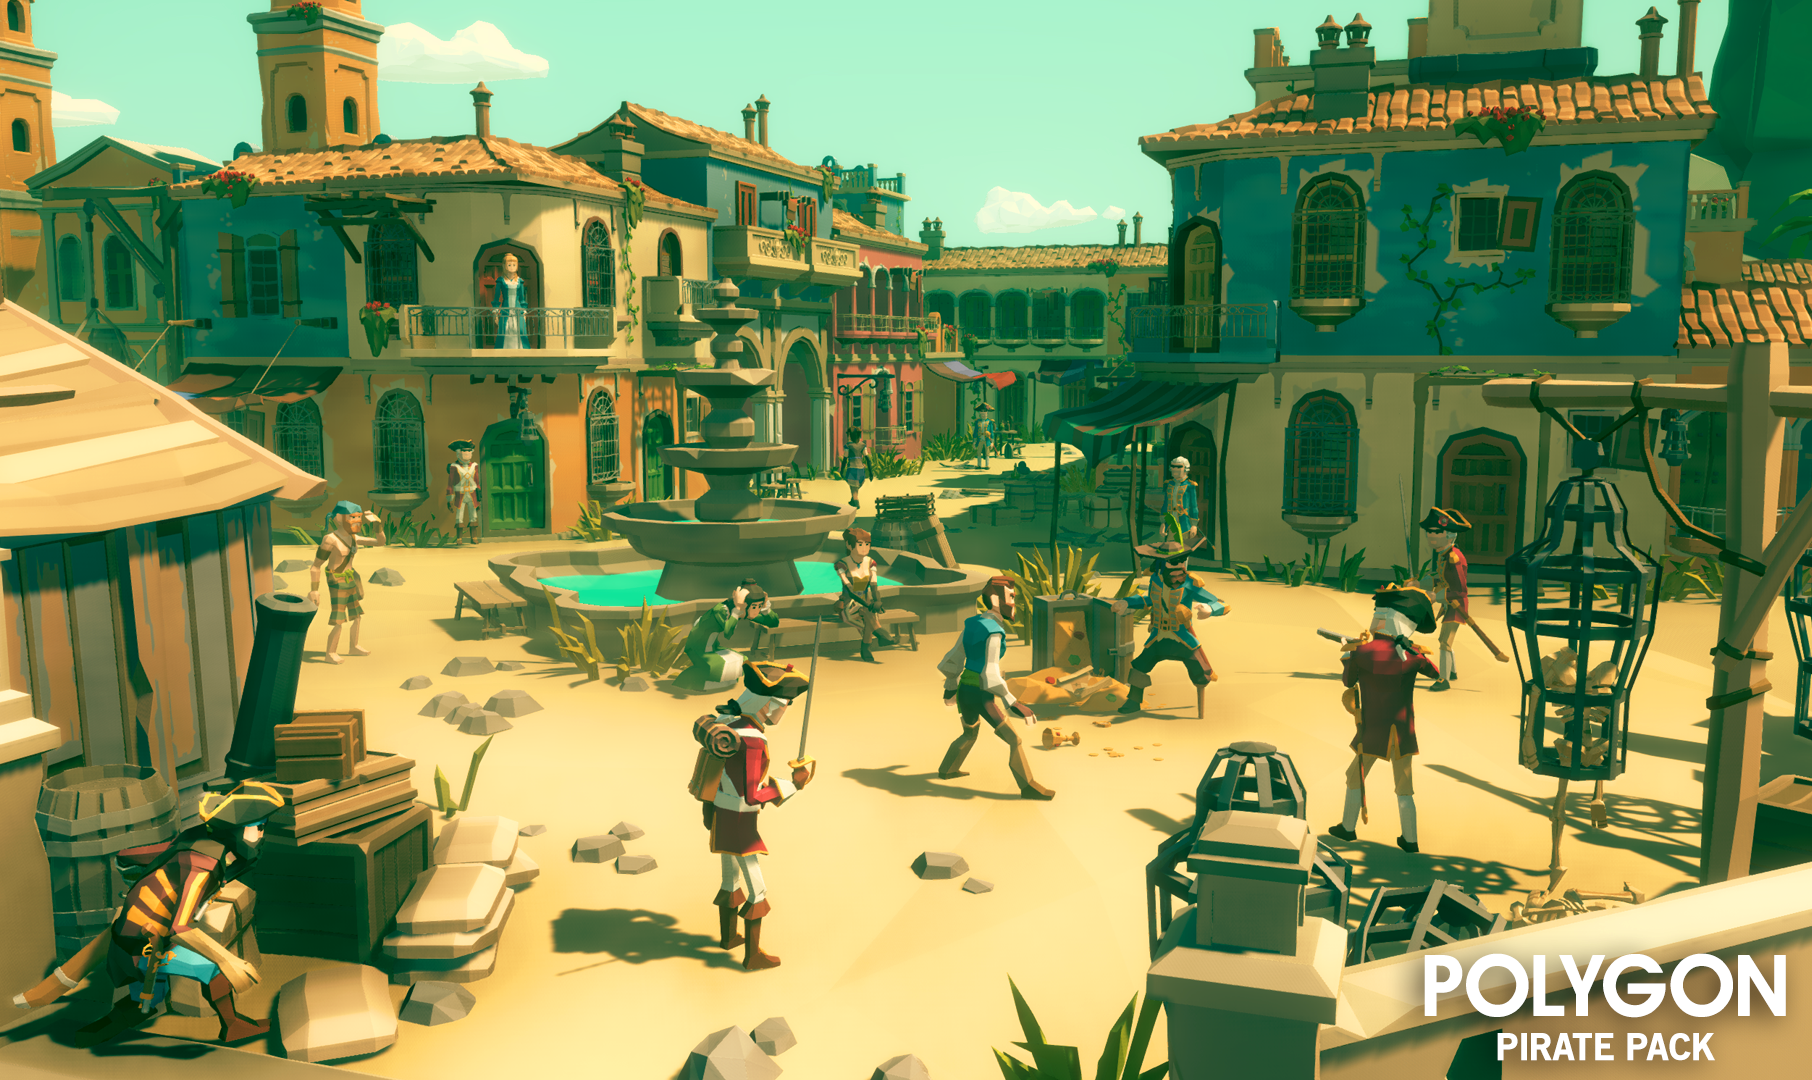 Low poly pirates and victorian era characters fighting in a town square